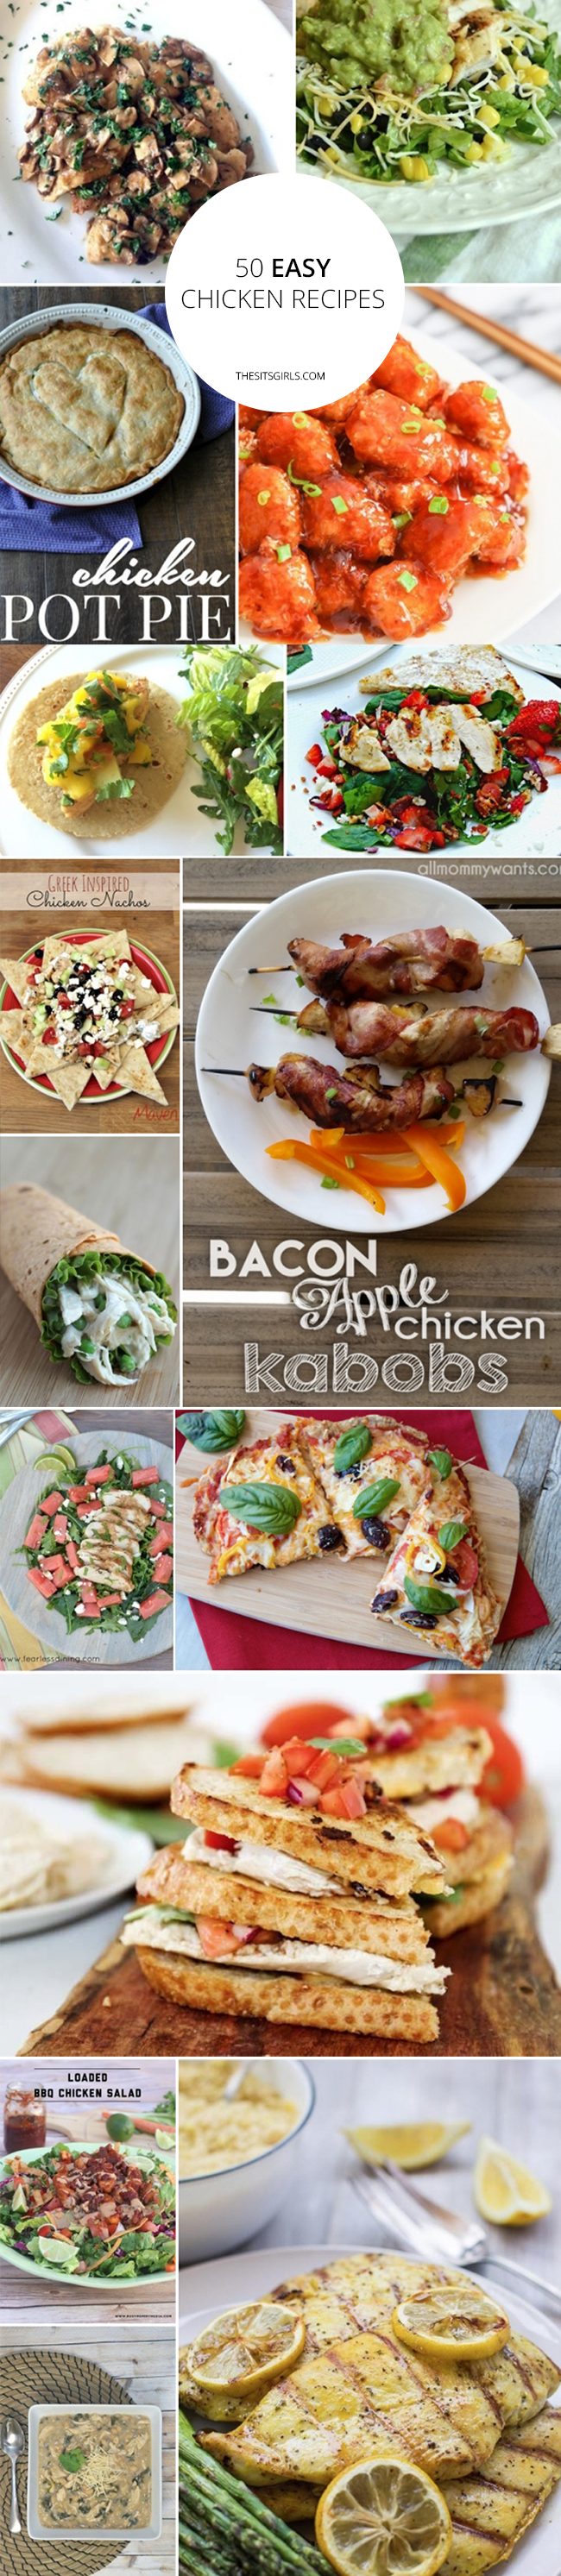 50 Fantastic & Easy Chicken Recipes | Includes baked and grilled chicken recipes and everything in between (tacos, pizzas, sandwiches, and more) to make your meal planning easy.